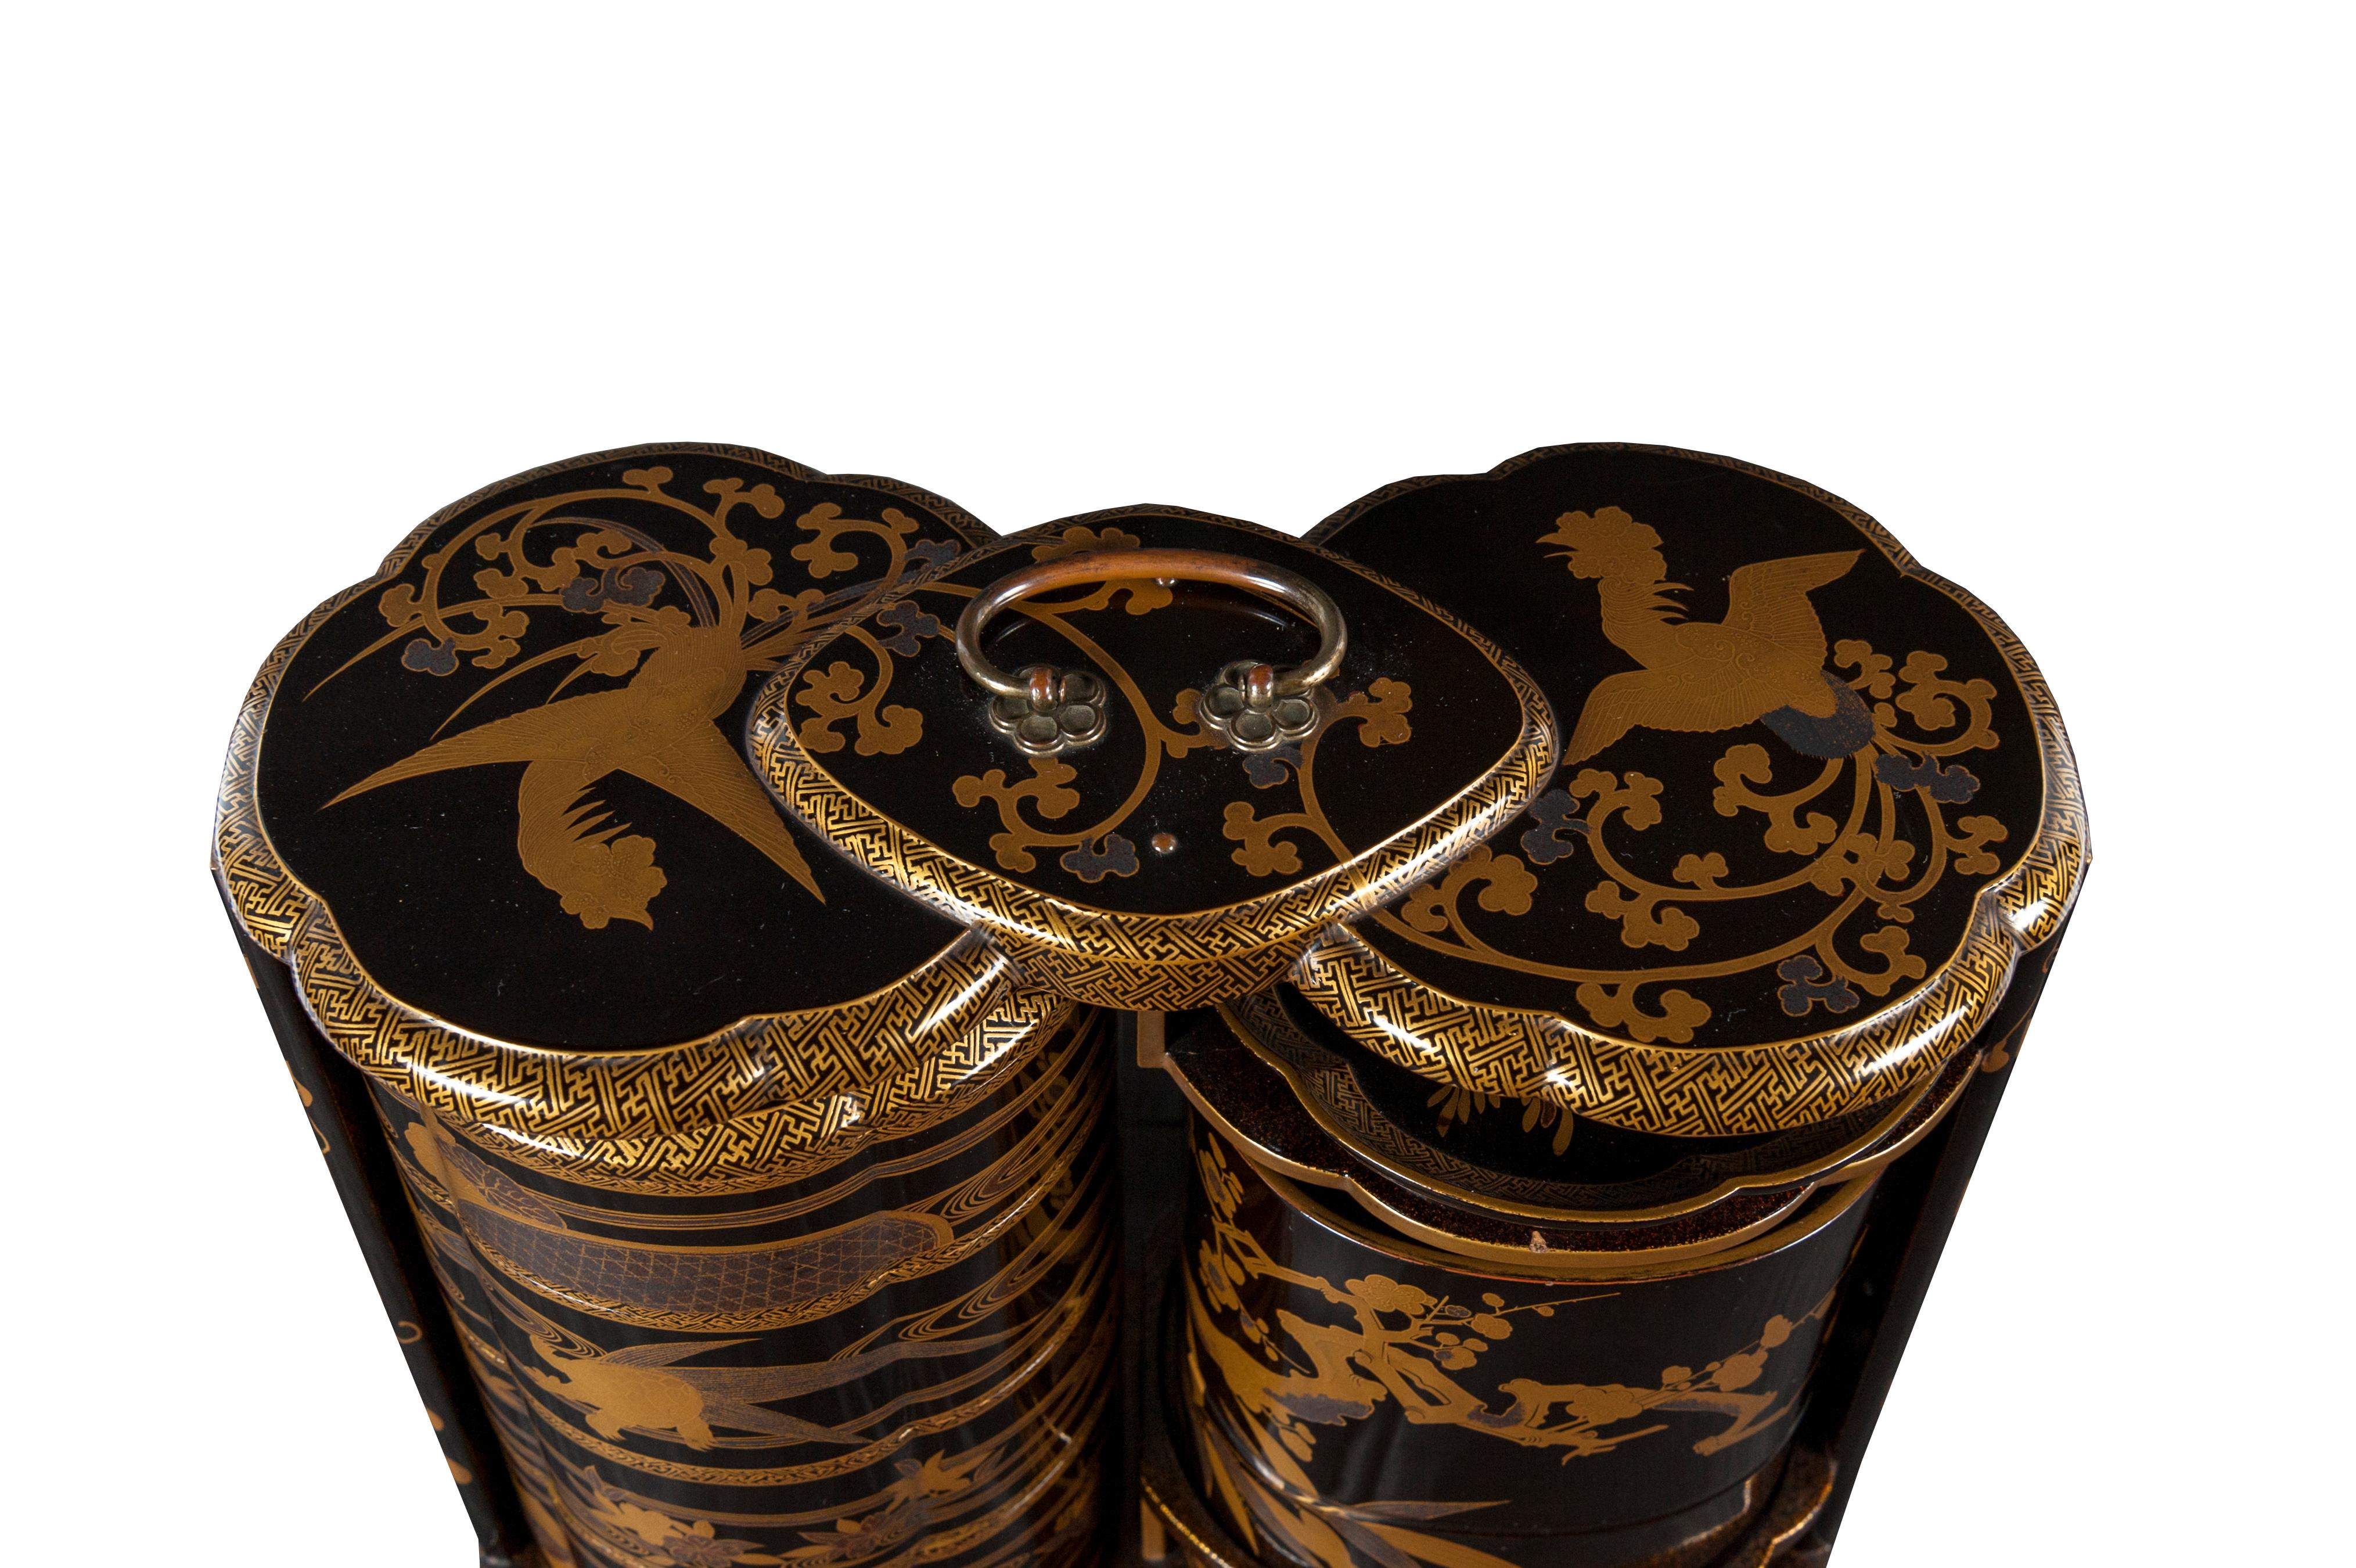 Black and gold lacquer sageju-bako (picnic box) decorated with floral motifs in hiramaki-e. It includes a sake bottle, a four-compartment box with nashi-ji lacquer inside, a simple tray and a hollow tray. At the top, there is a bronze handle for